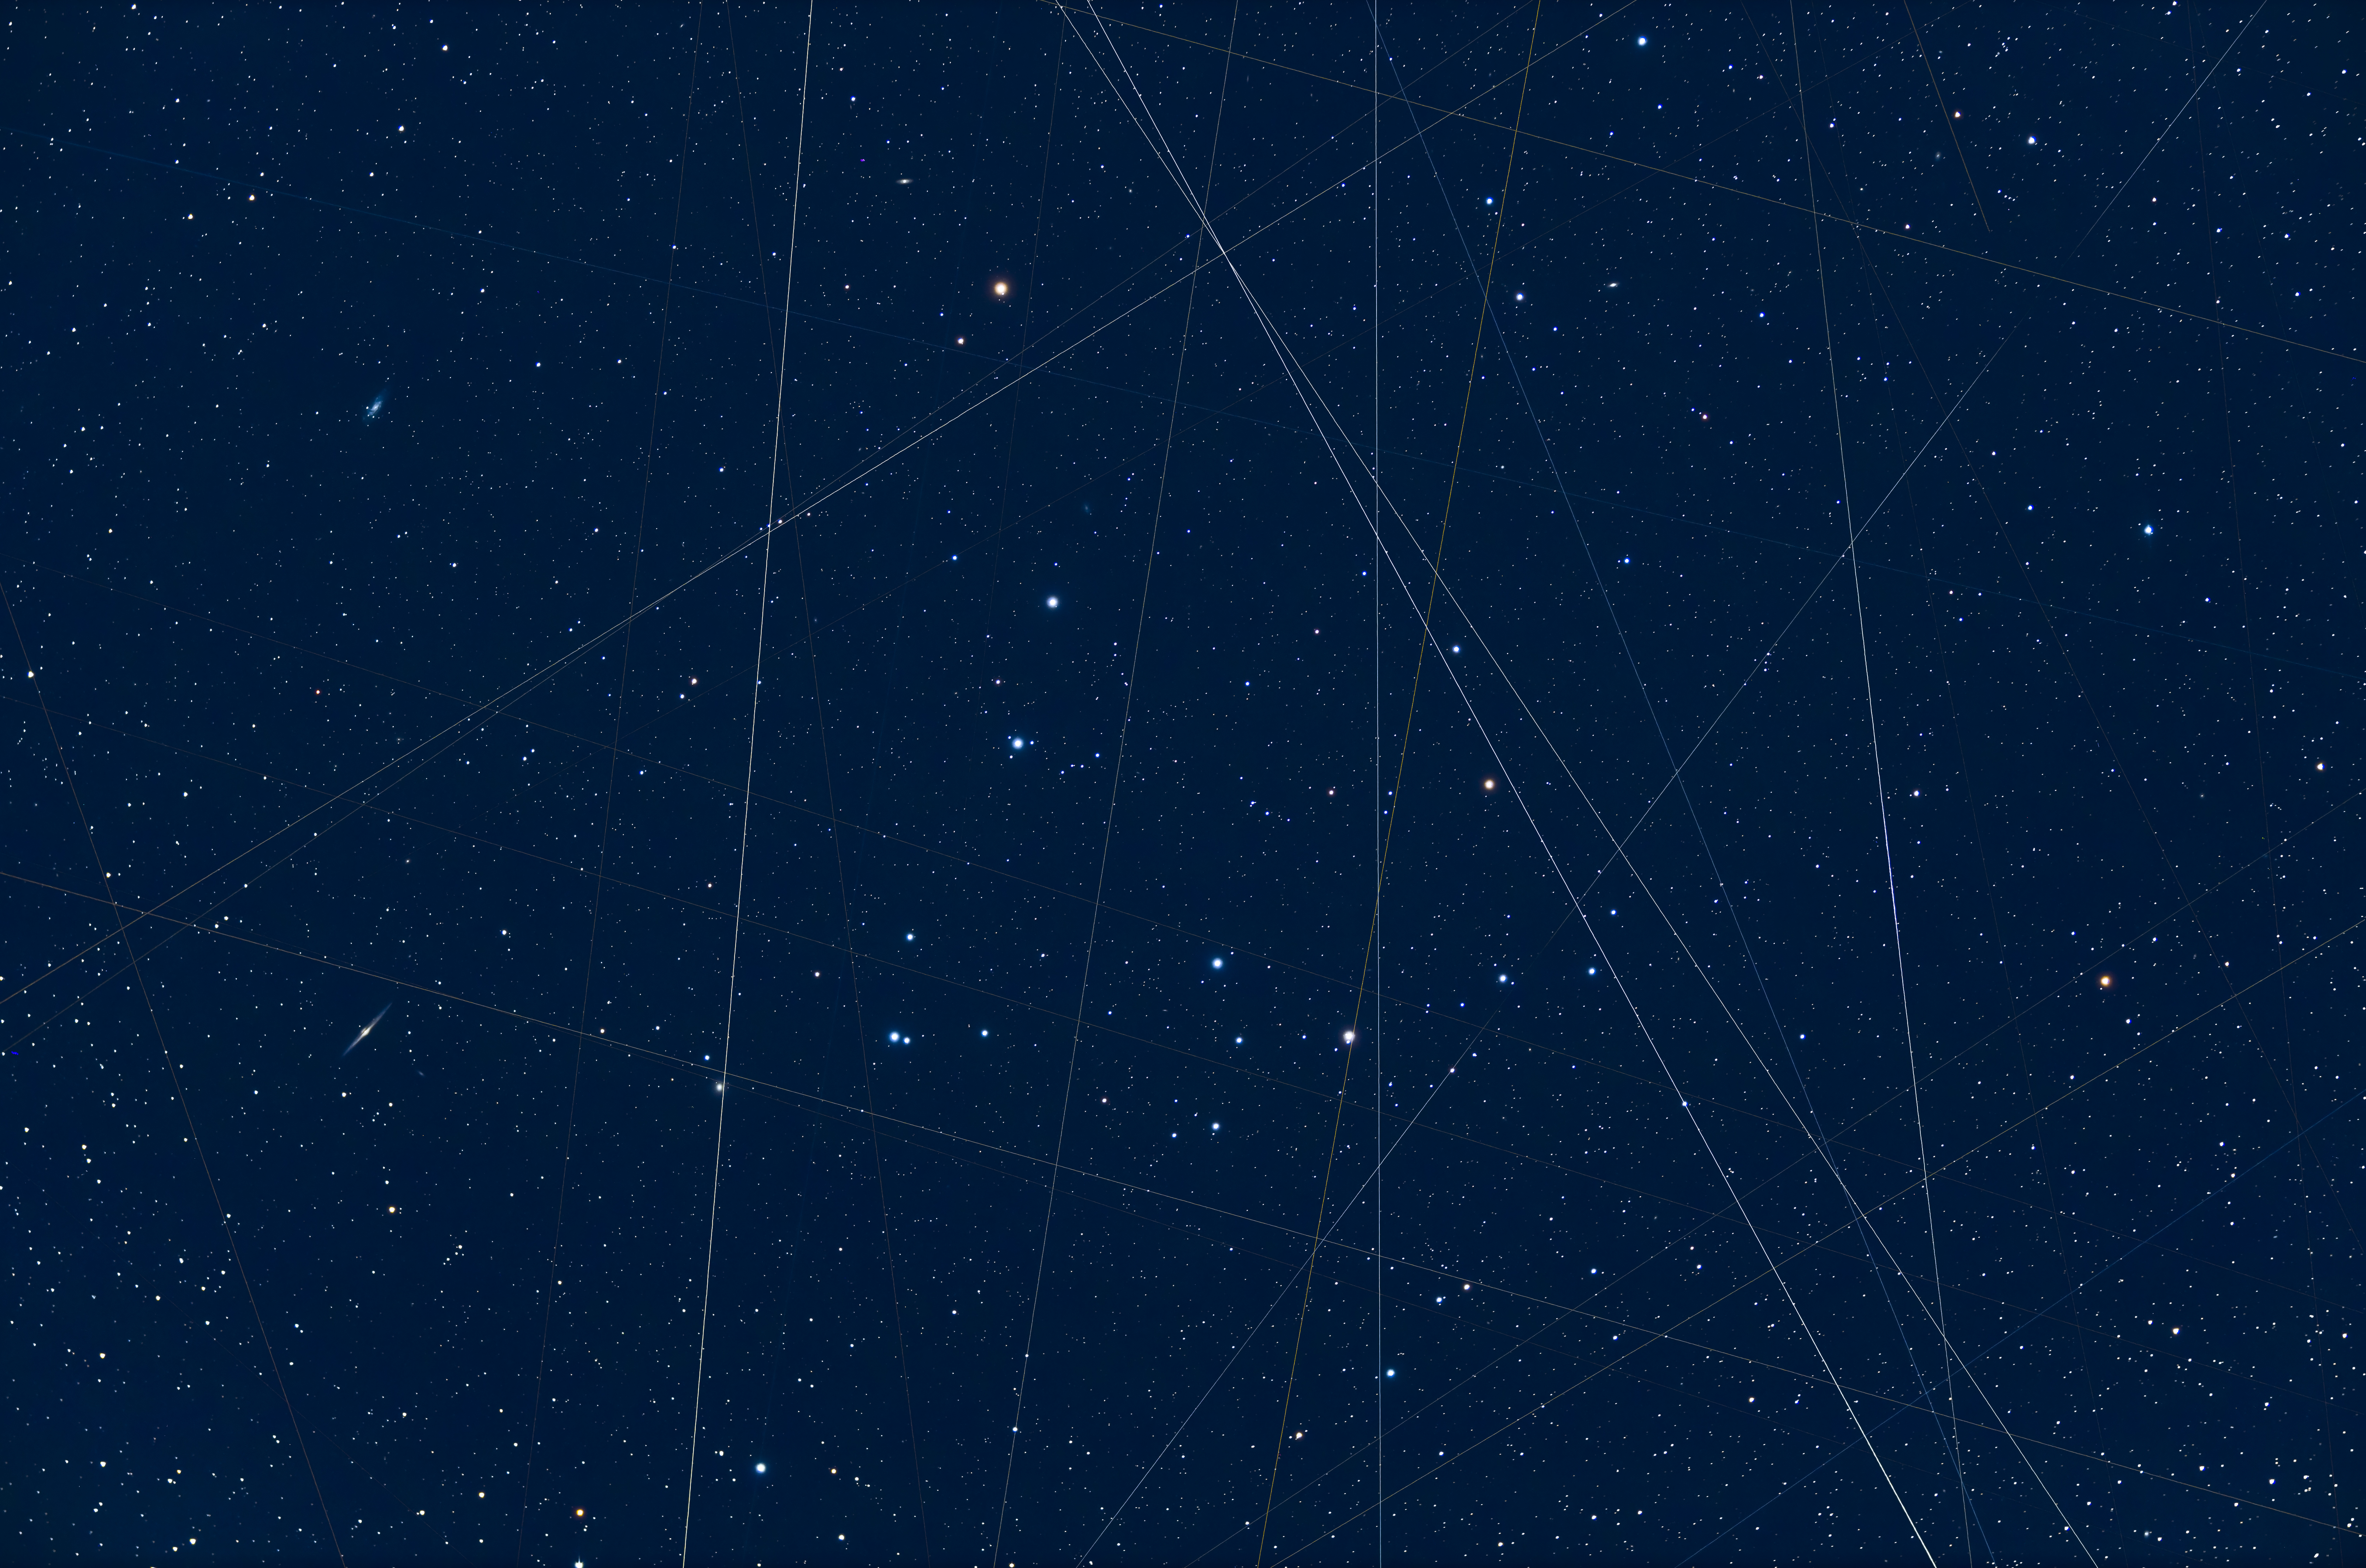 Multiple satellites Streak through this composite of the Coma Berenices cluster, shot through a wide-field telescope over the course of about an hour. The trails mostly run north-south, so the photographer posits they are due to polar-orbiting satellites, rather than the largely west-east tracks of Starlink.